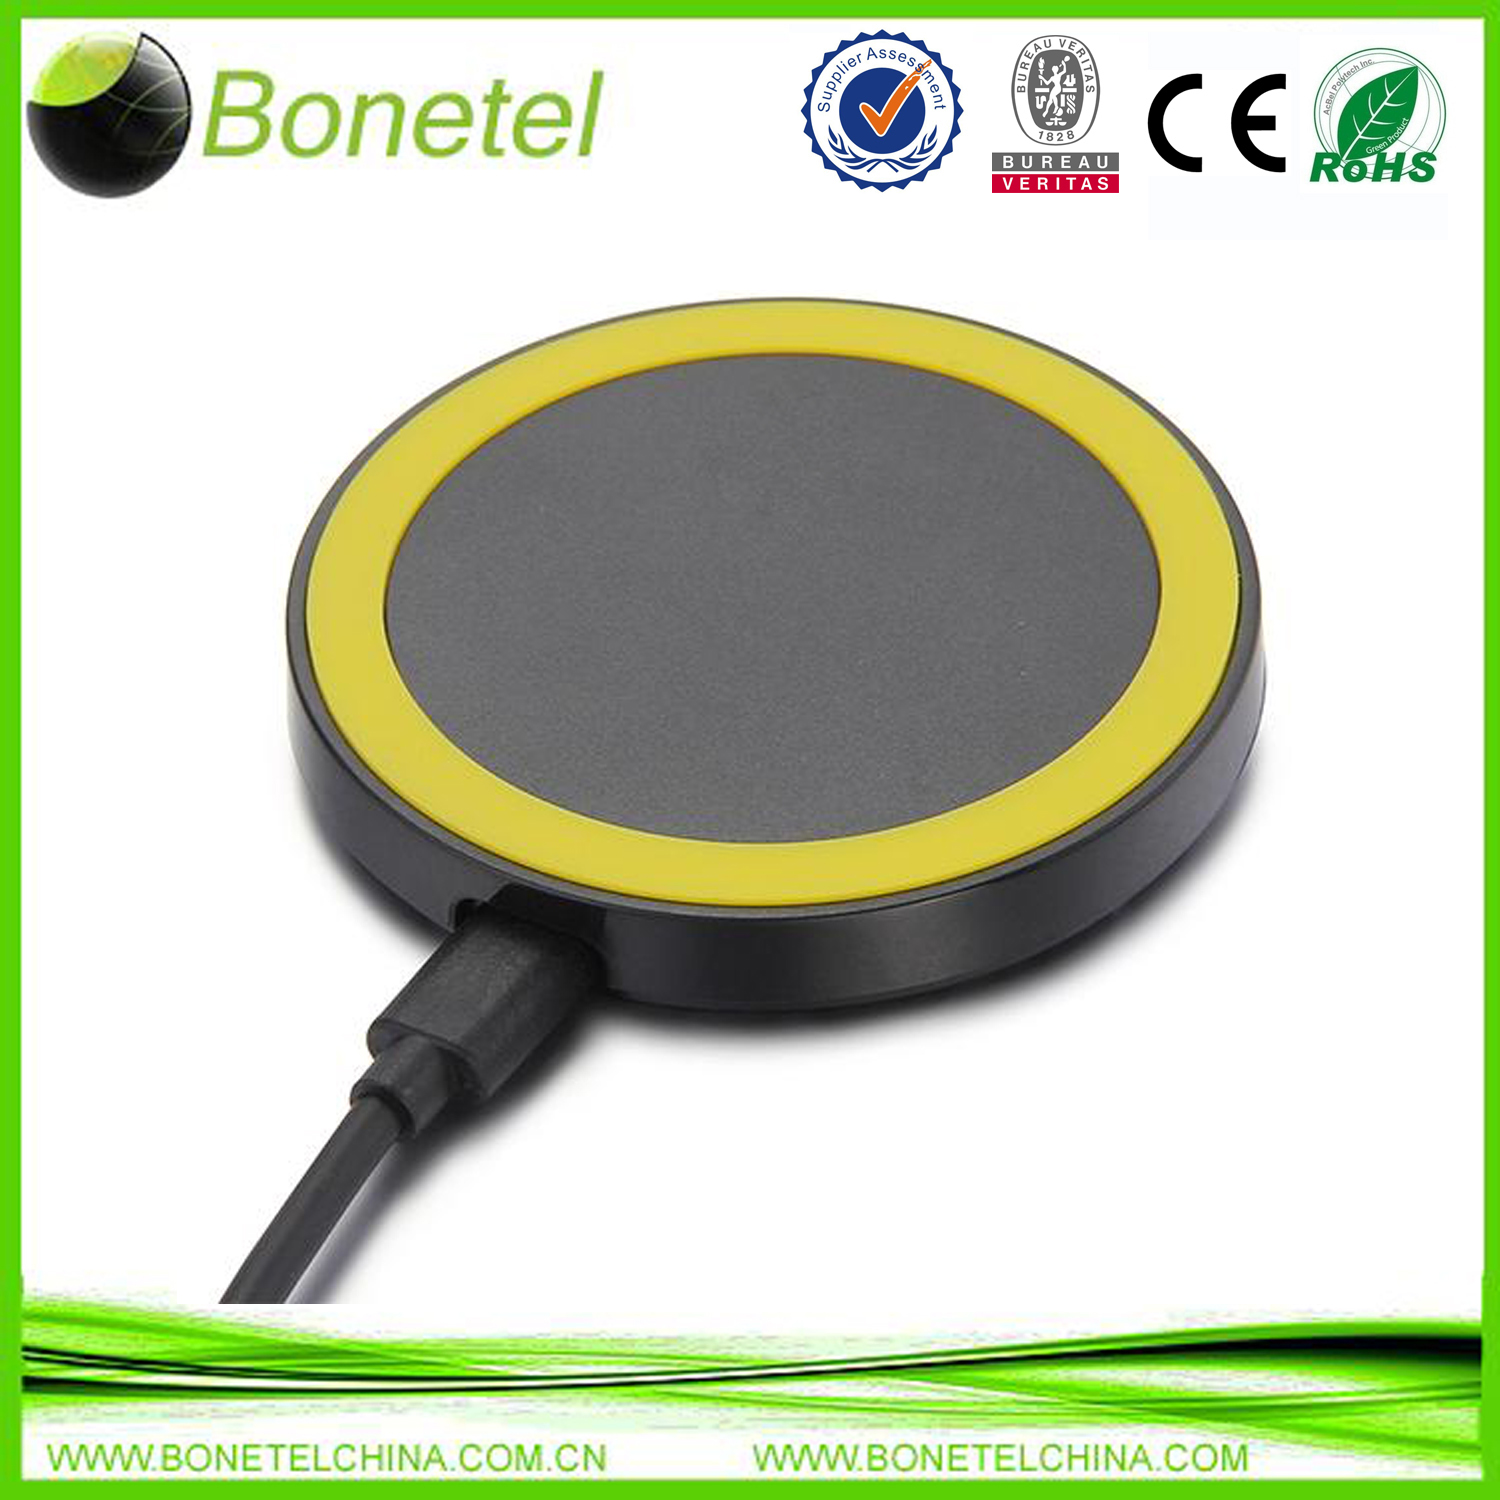 Qi Wireless Mobile Phone Power Charger Charging Receiver Pad Black For Smart Phone